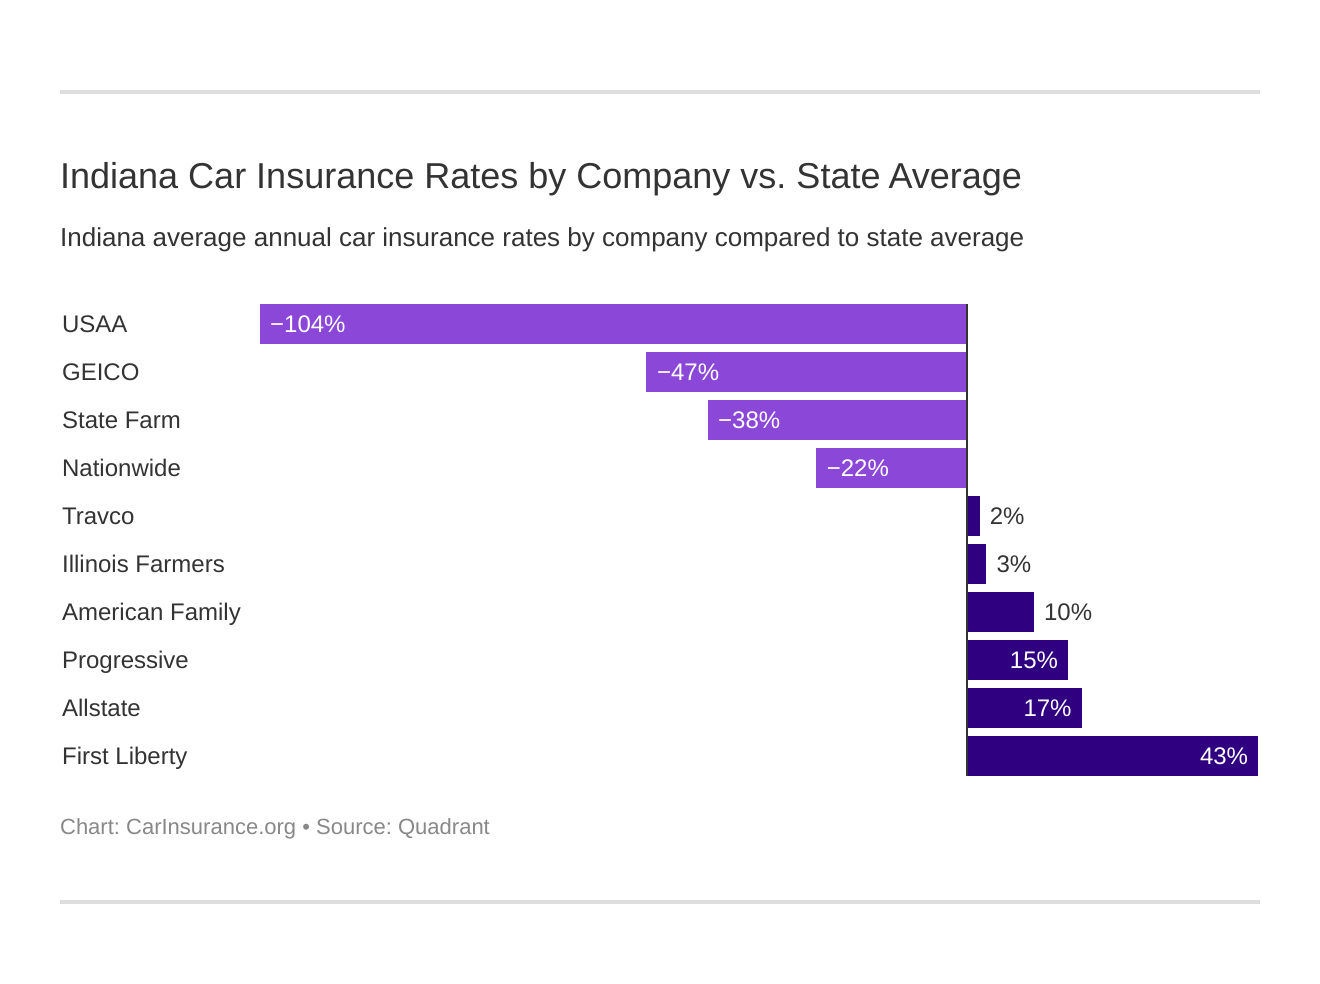 Indiana Car Insurance Rates by Company vs. State Average